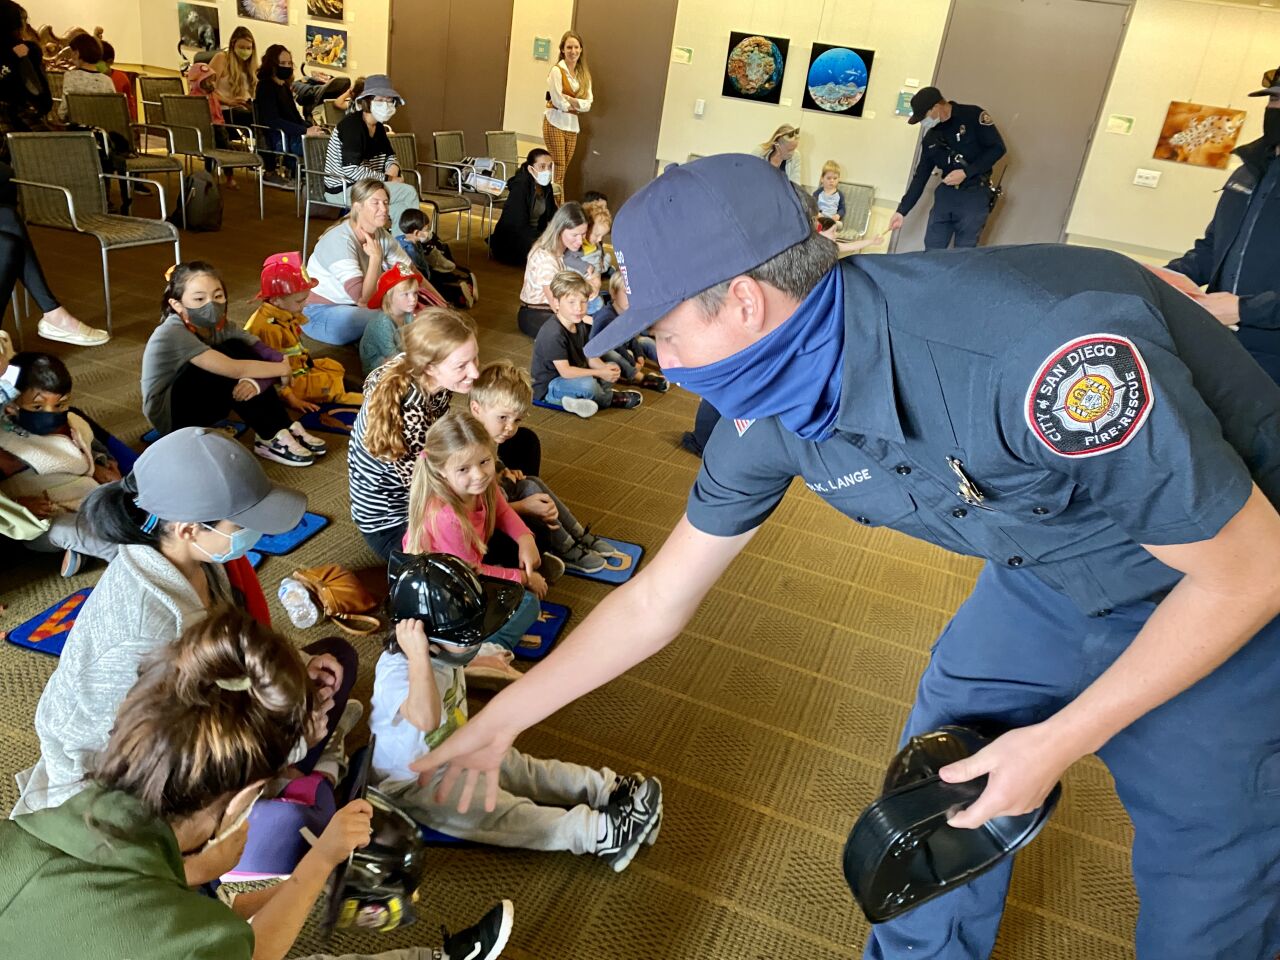 A La Jolla firefighter distributes hats and stickers to visitors at the La Jolla/Riford Library on Nov. 4.